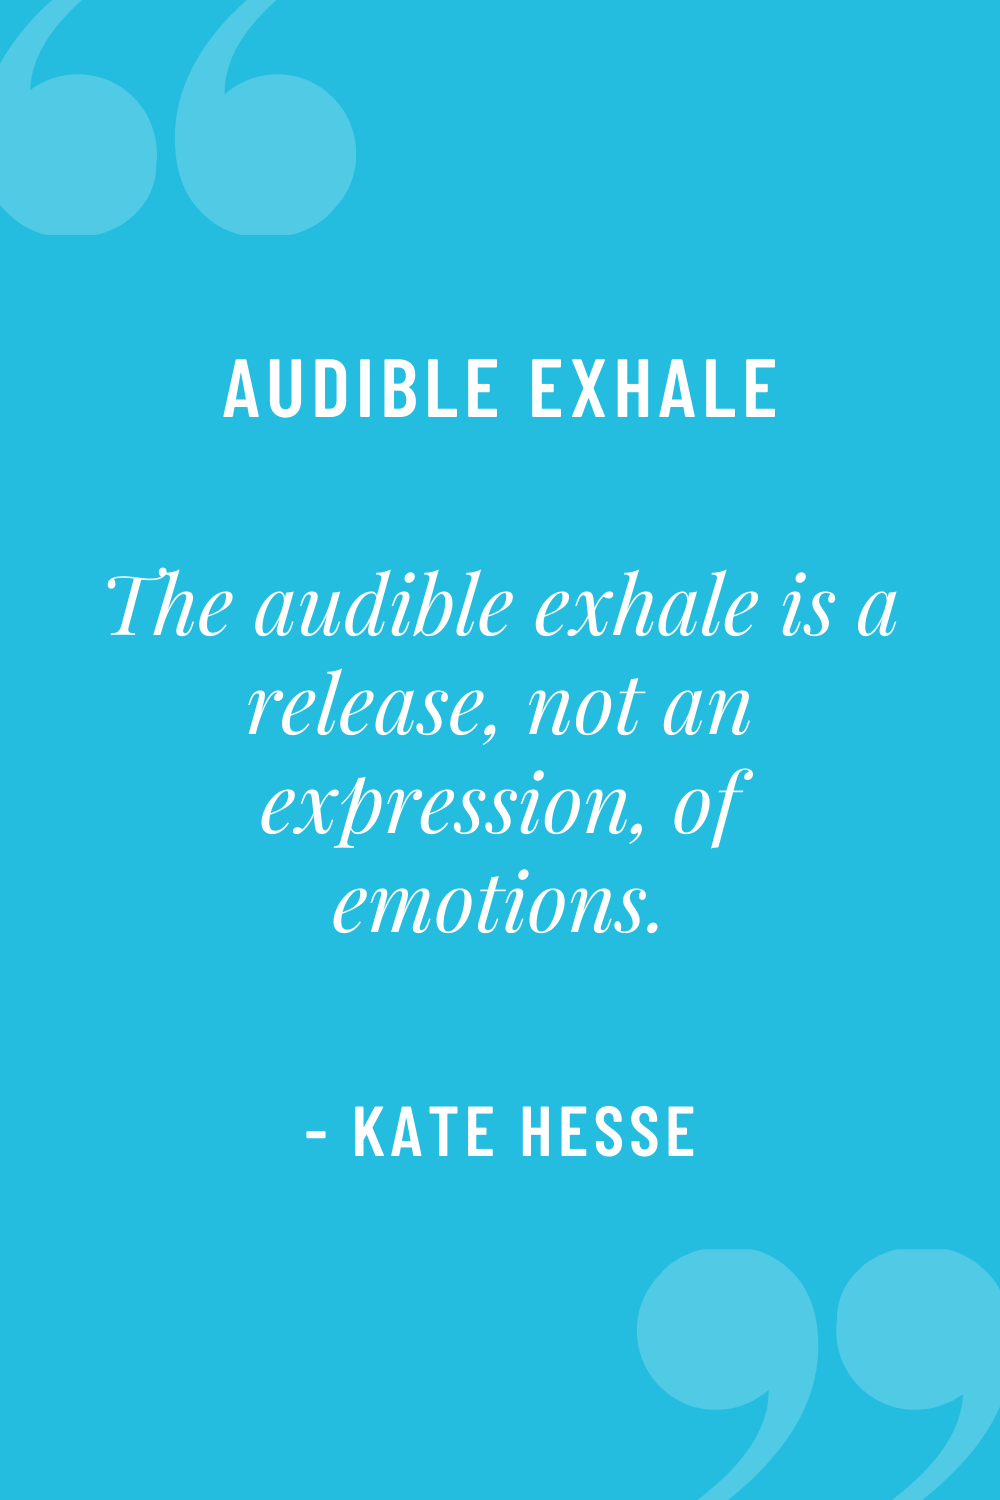 The audible exhale is a release, not an expression, of emotions.